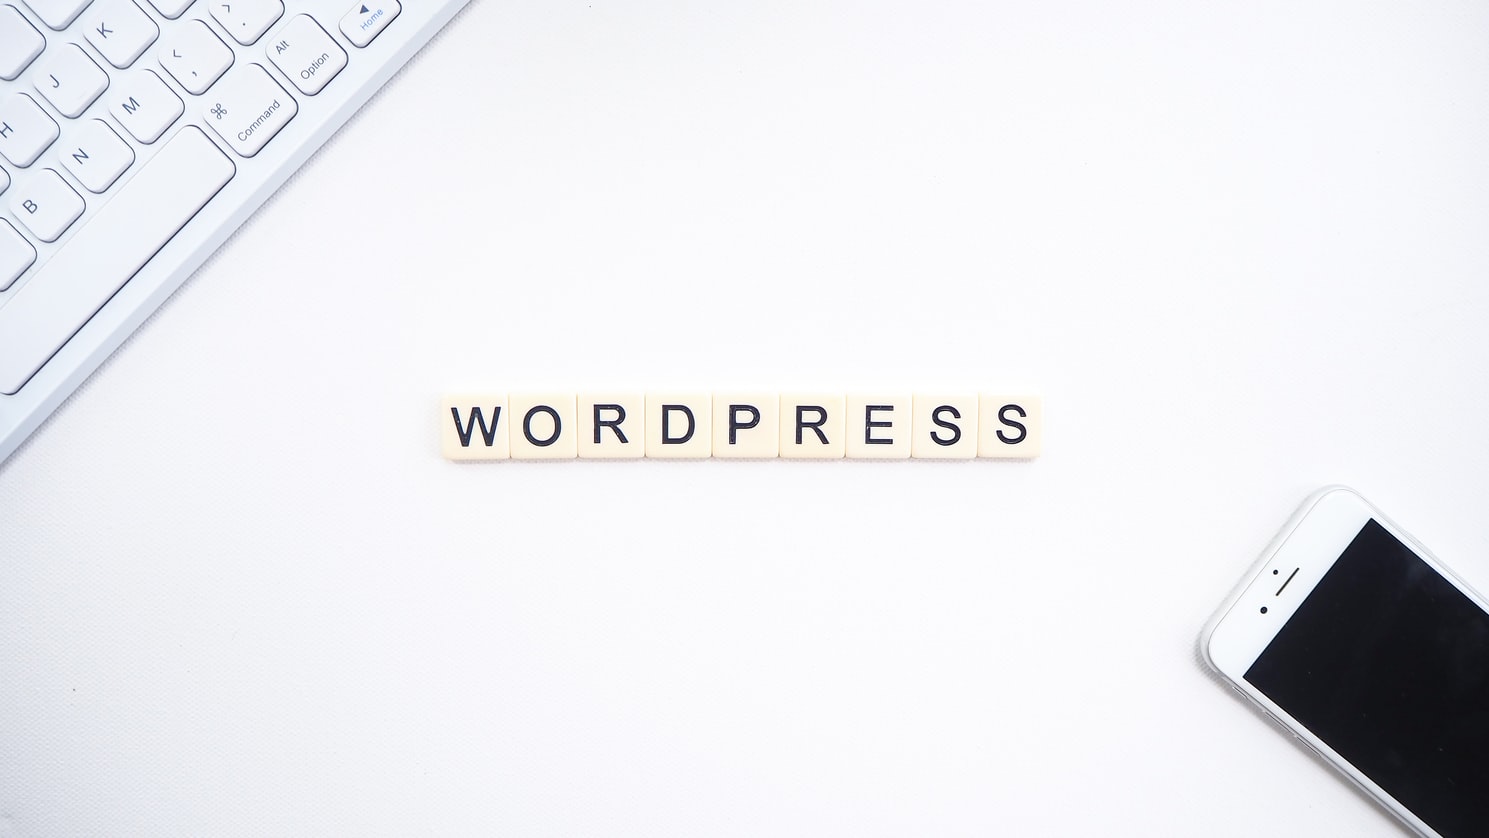 University of Wisconsin Offers Free Course on Creating WordPress Websites